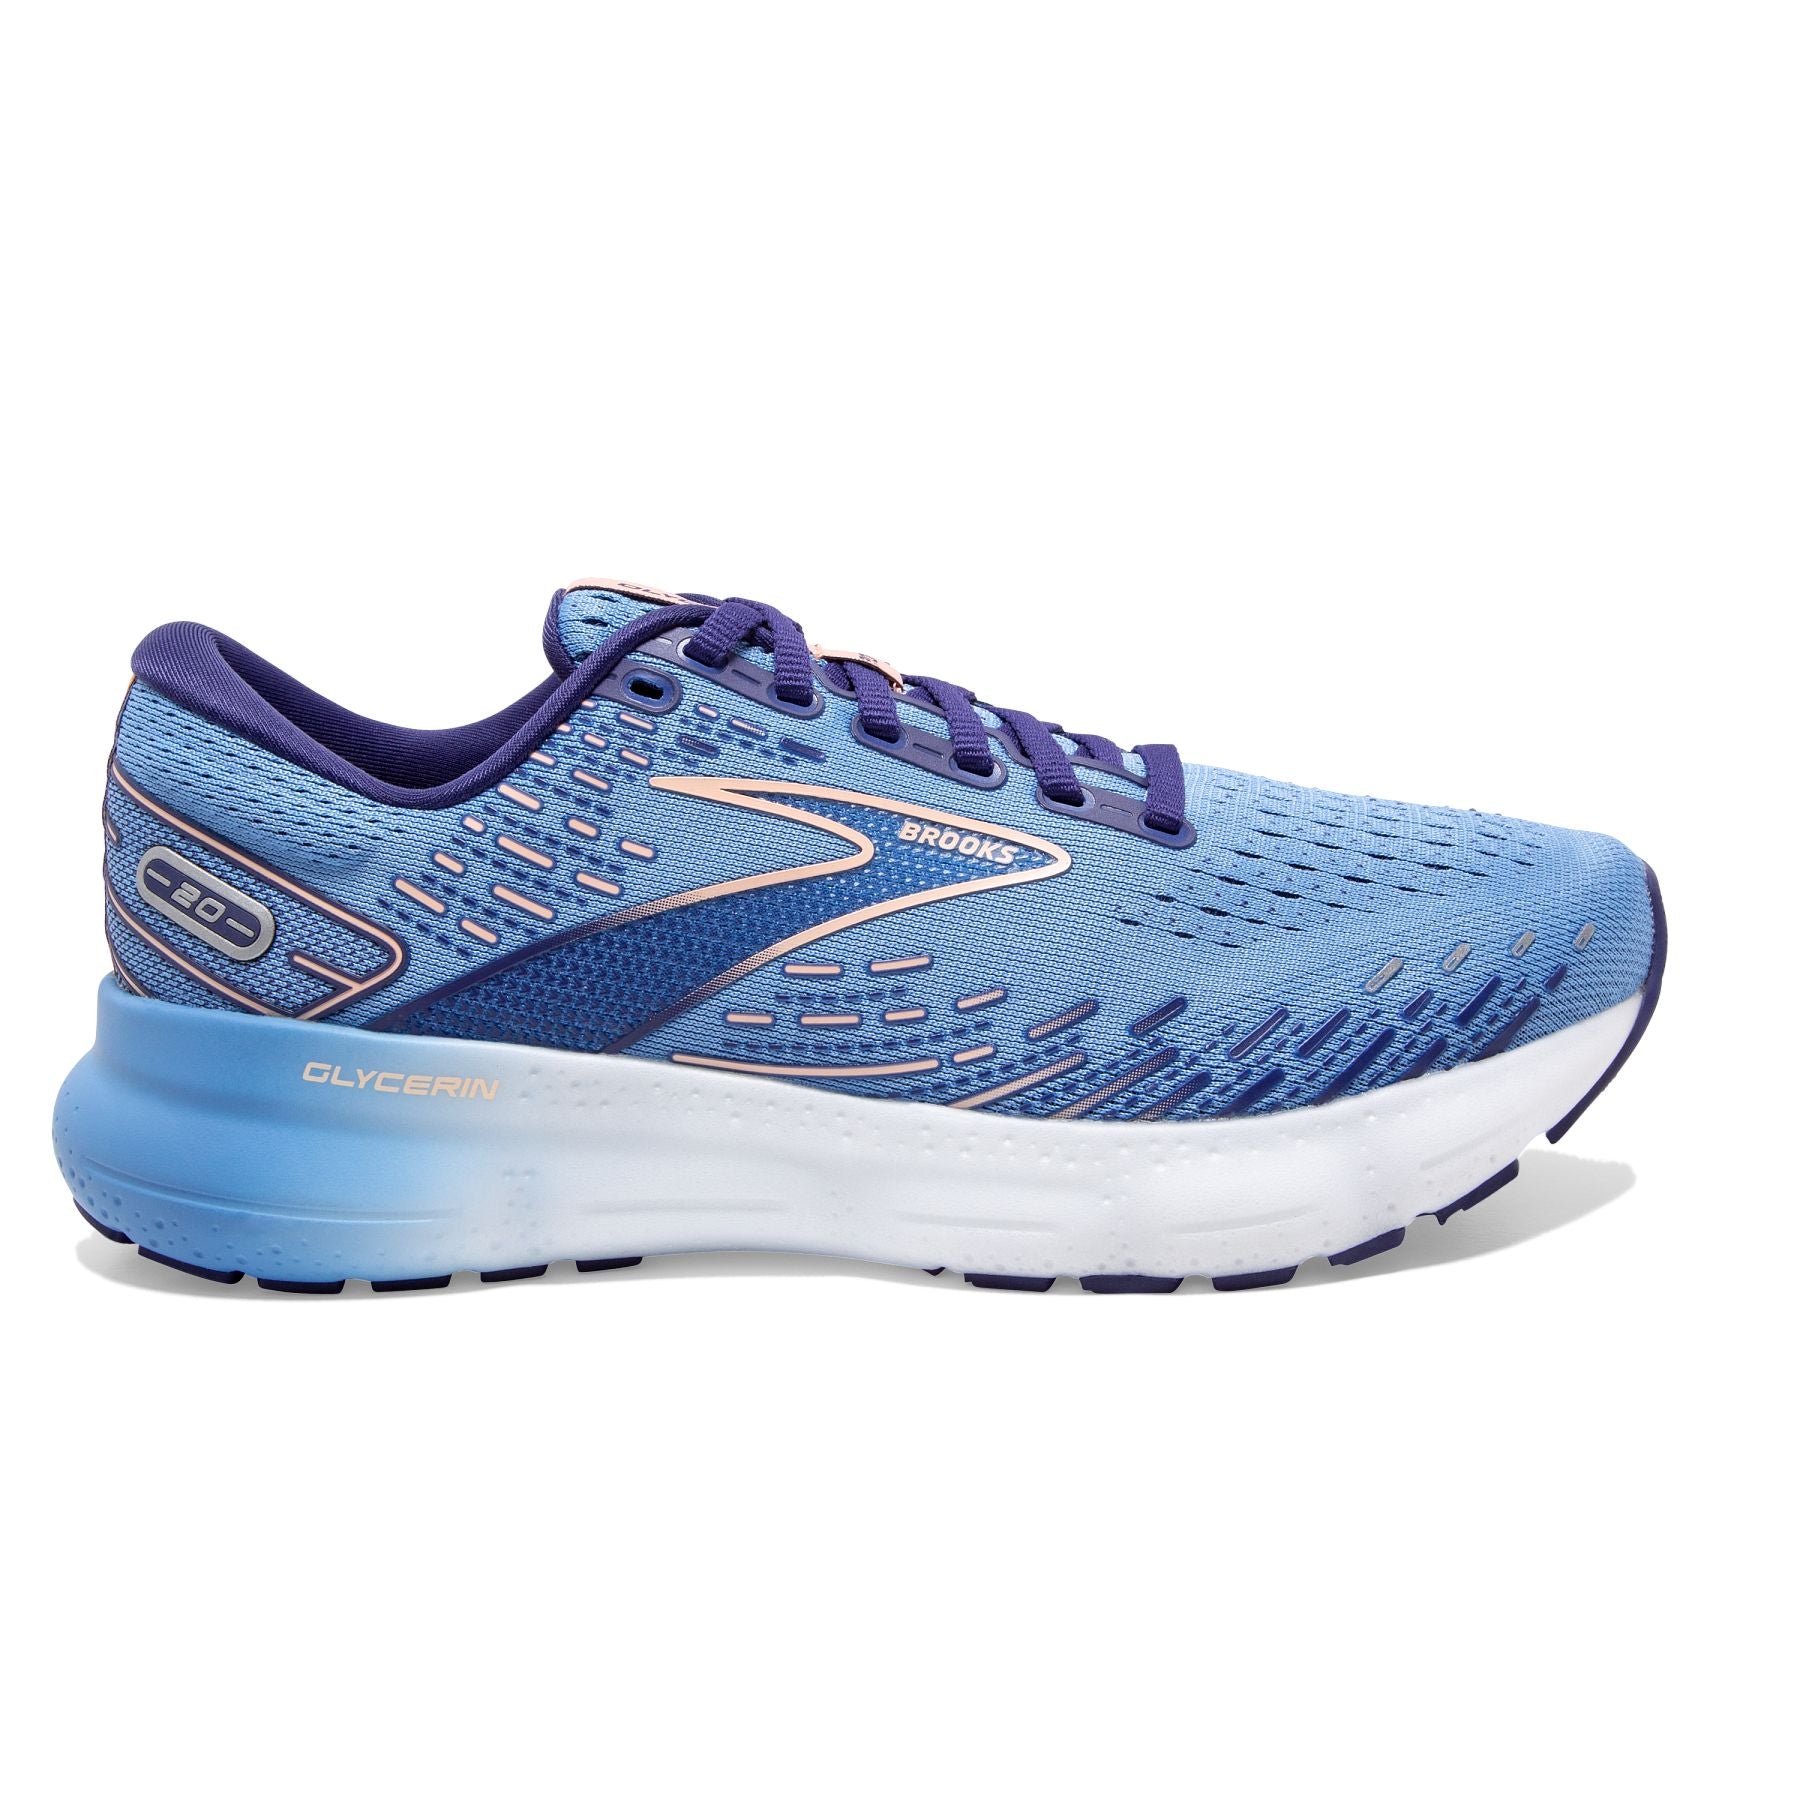 Lateral view of the Brook's Women's Glycerin 20 in the color Blissful Blue/Peach/White